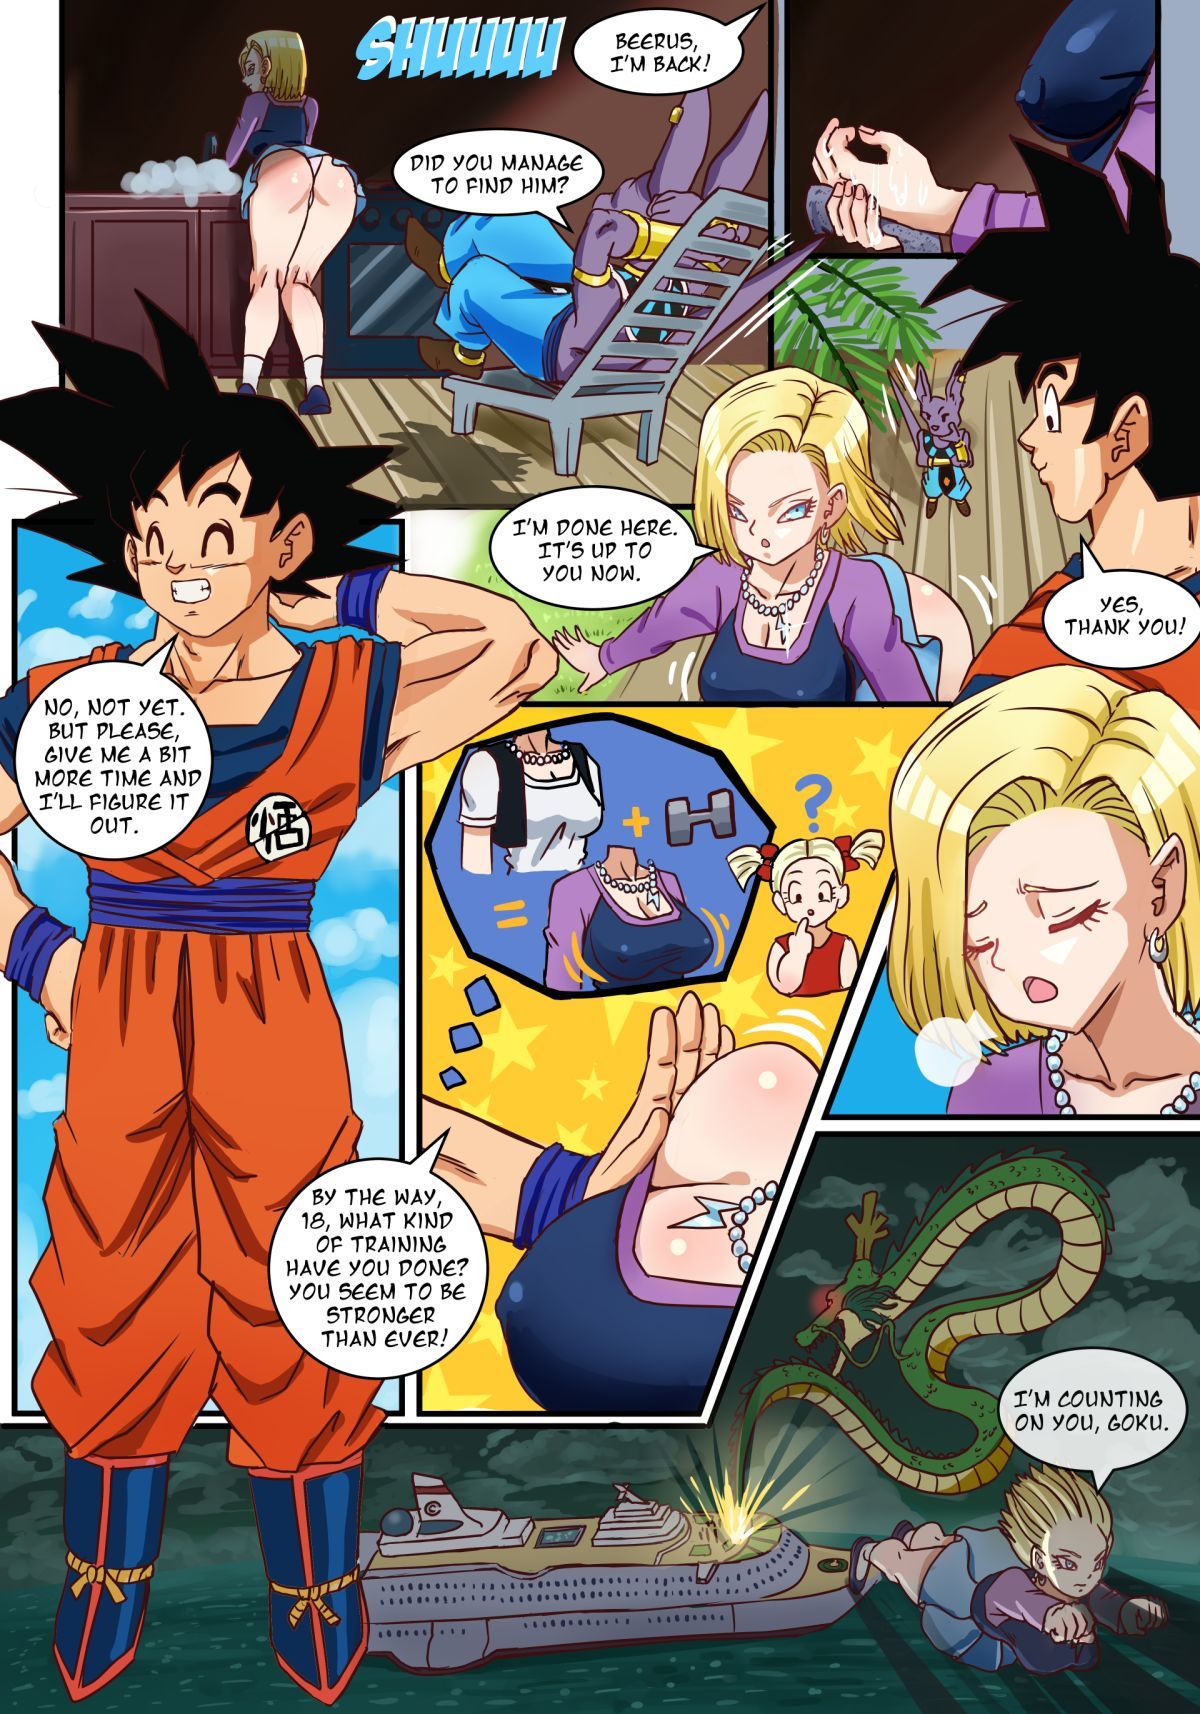 Android past time while krillin